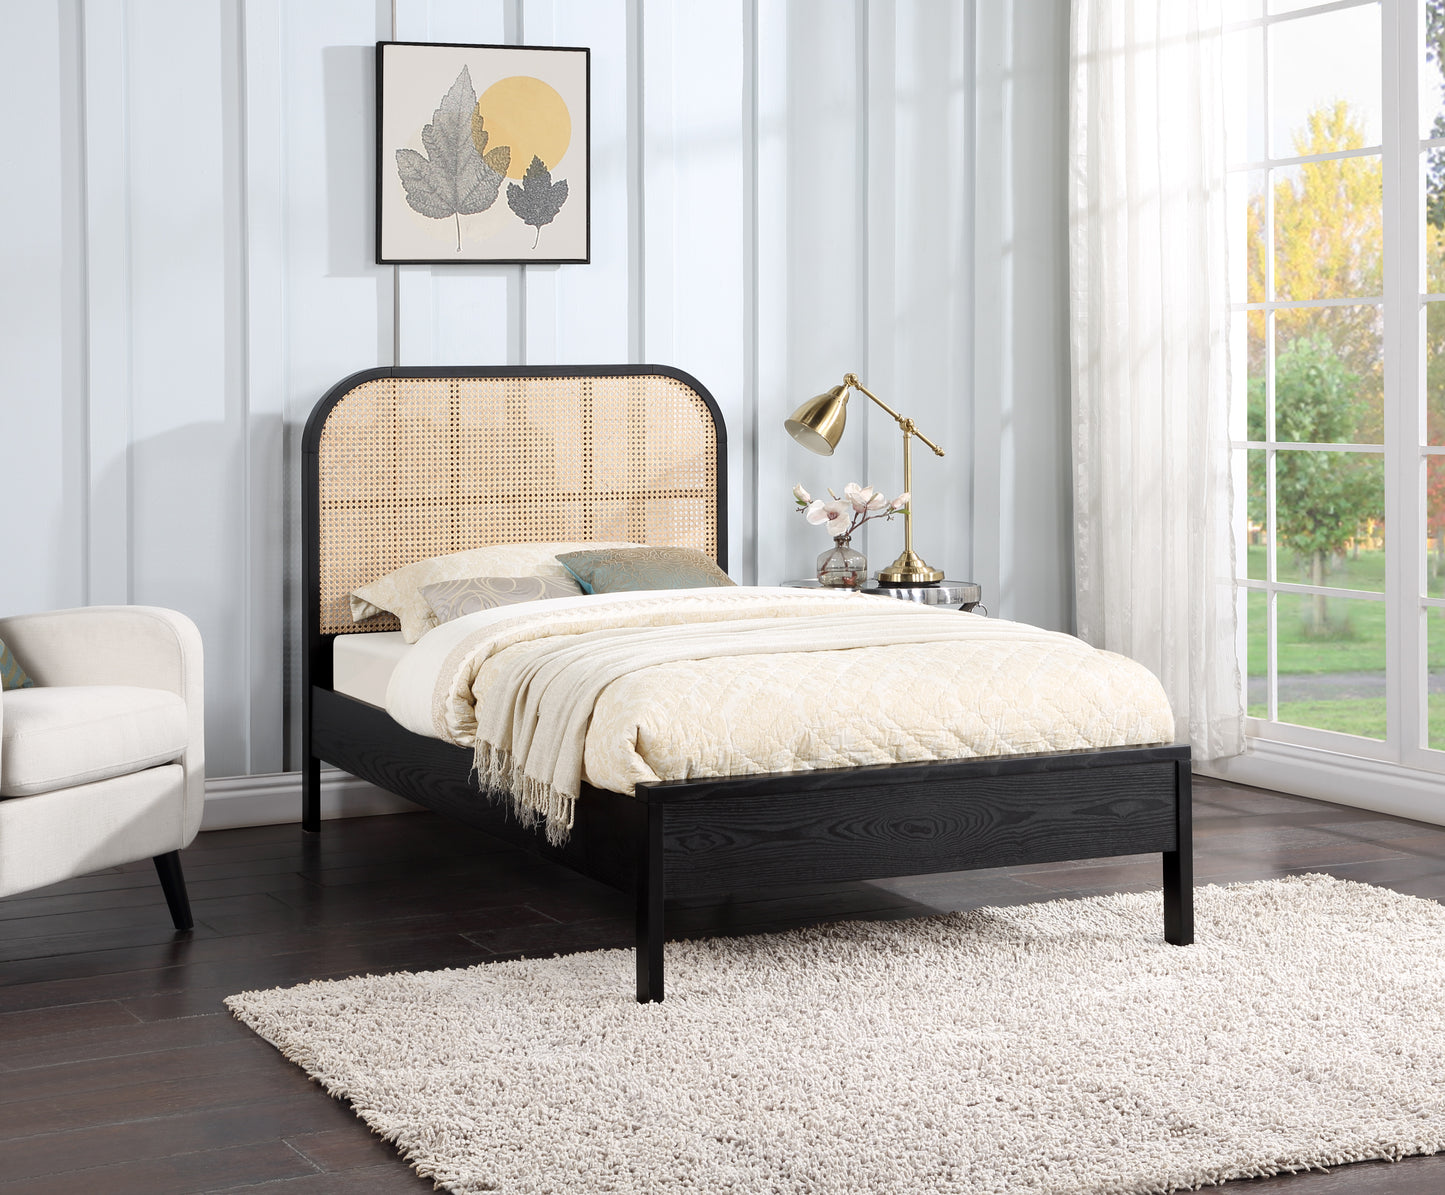 twin bed (3 boxes)